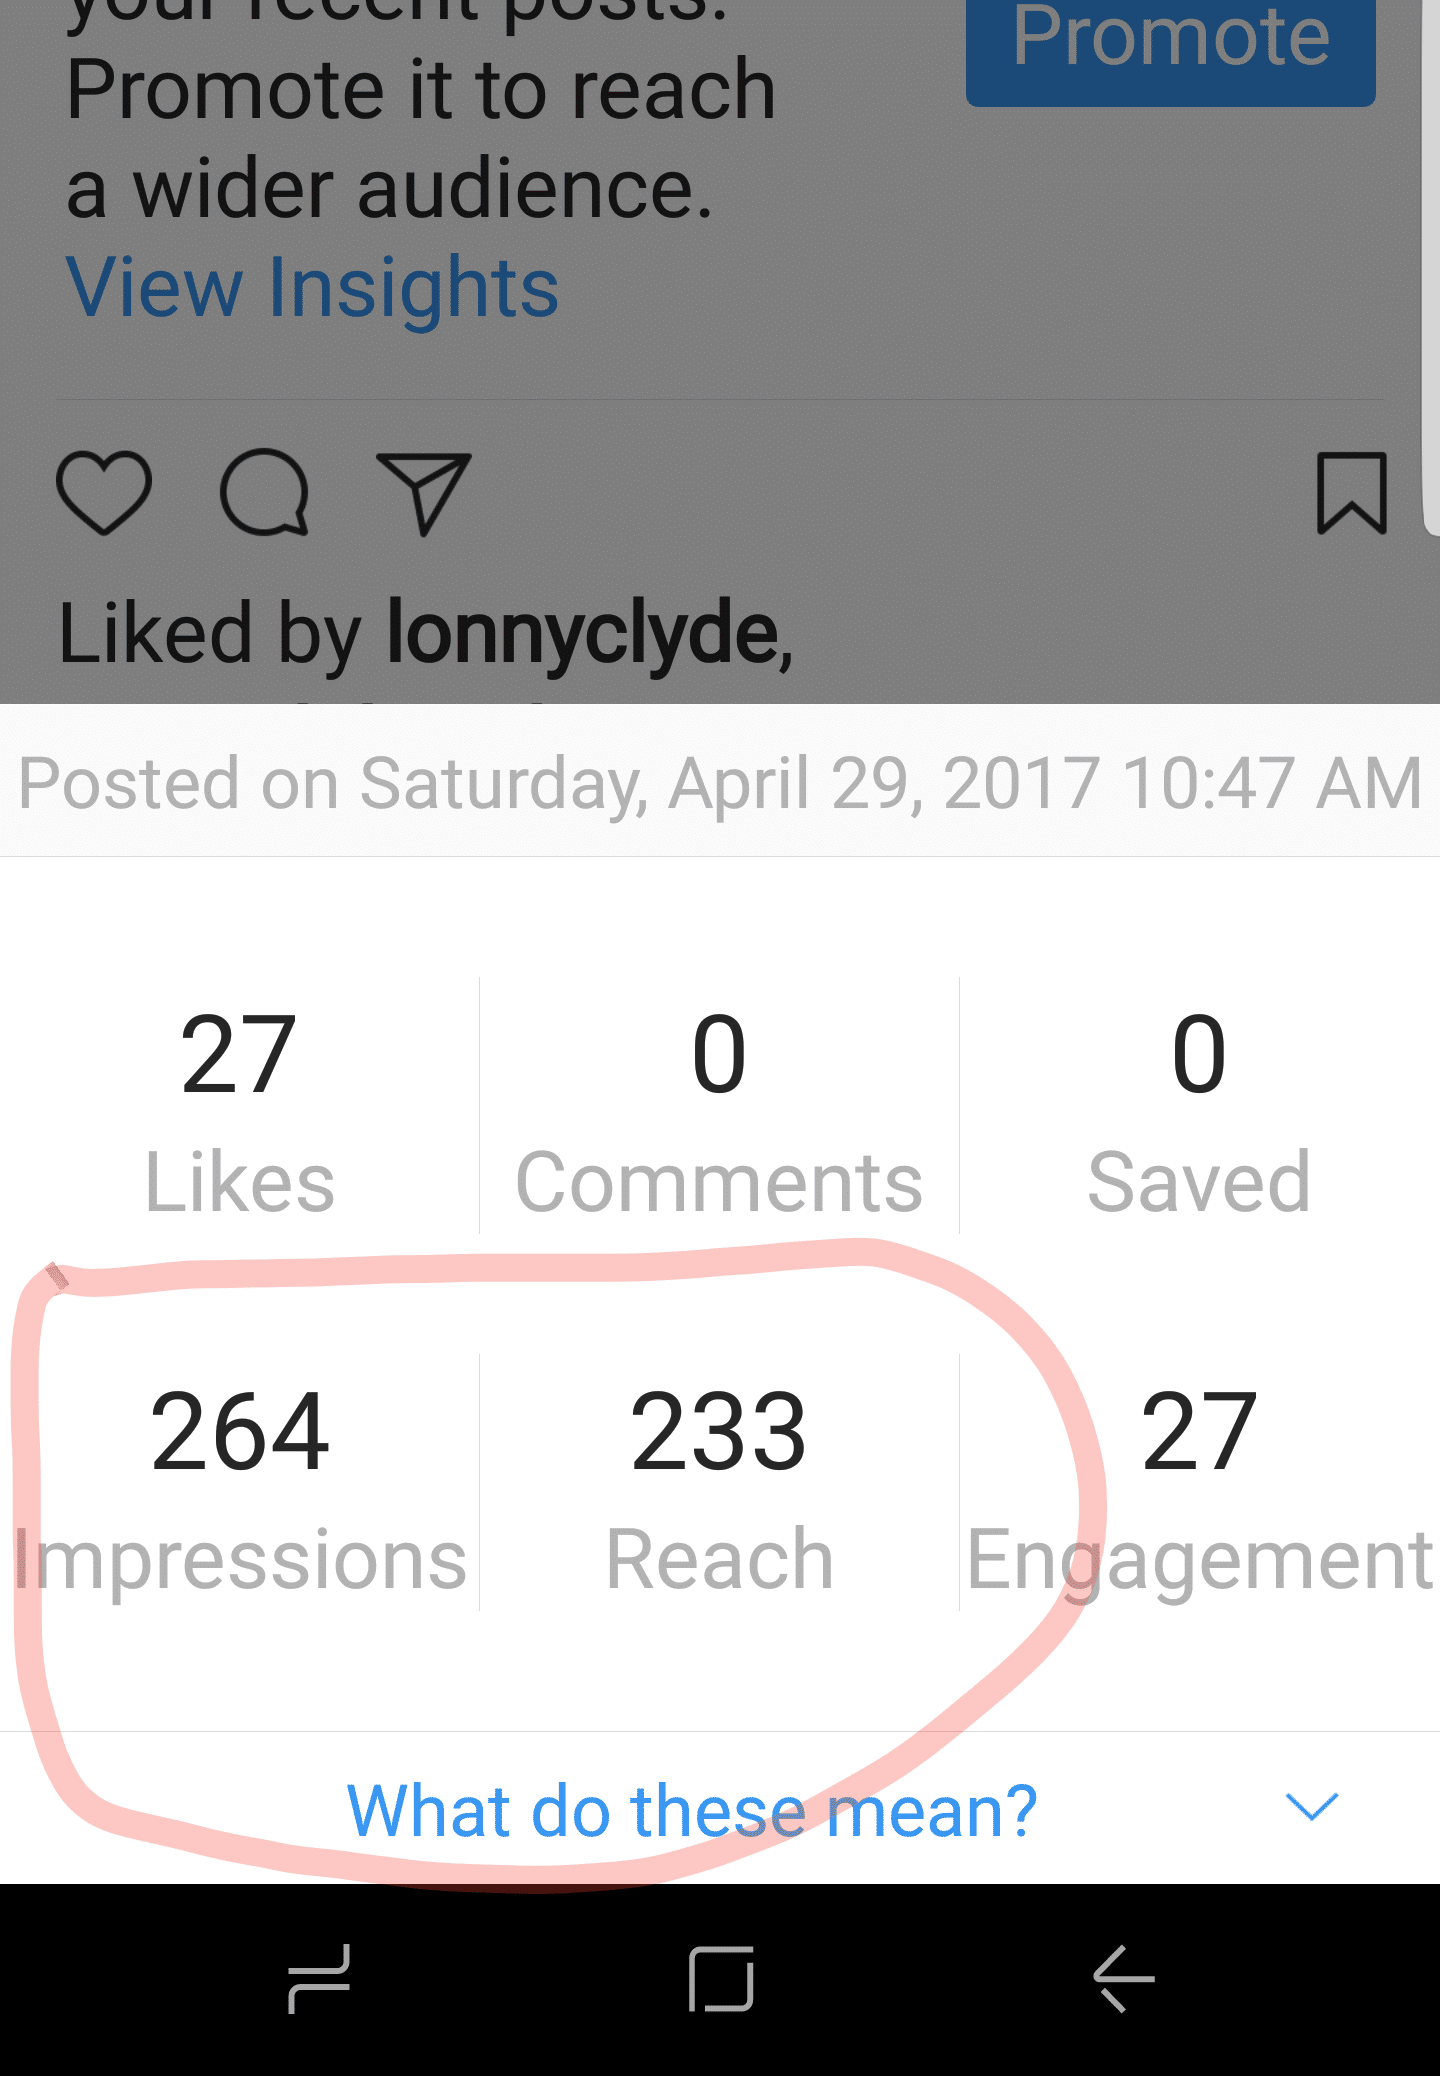 instagram posting strategy resulted in more impressions and reach